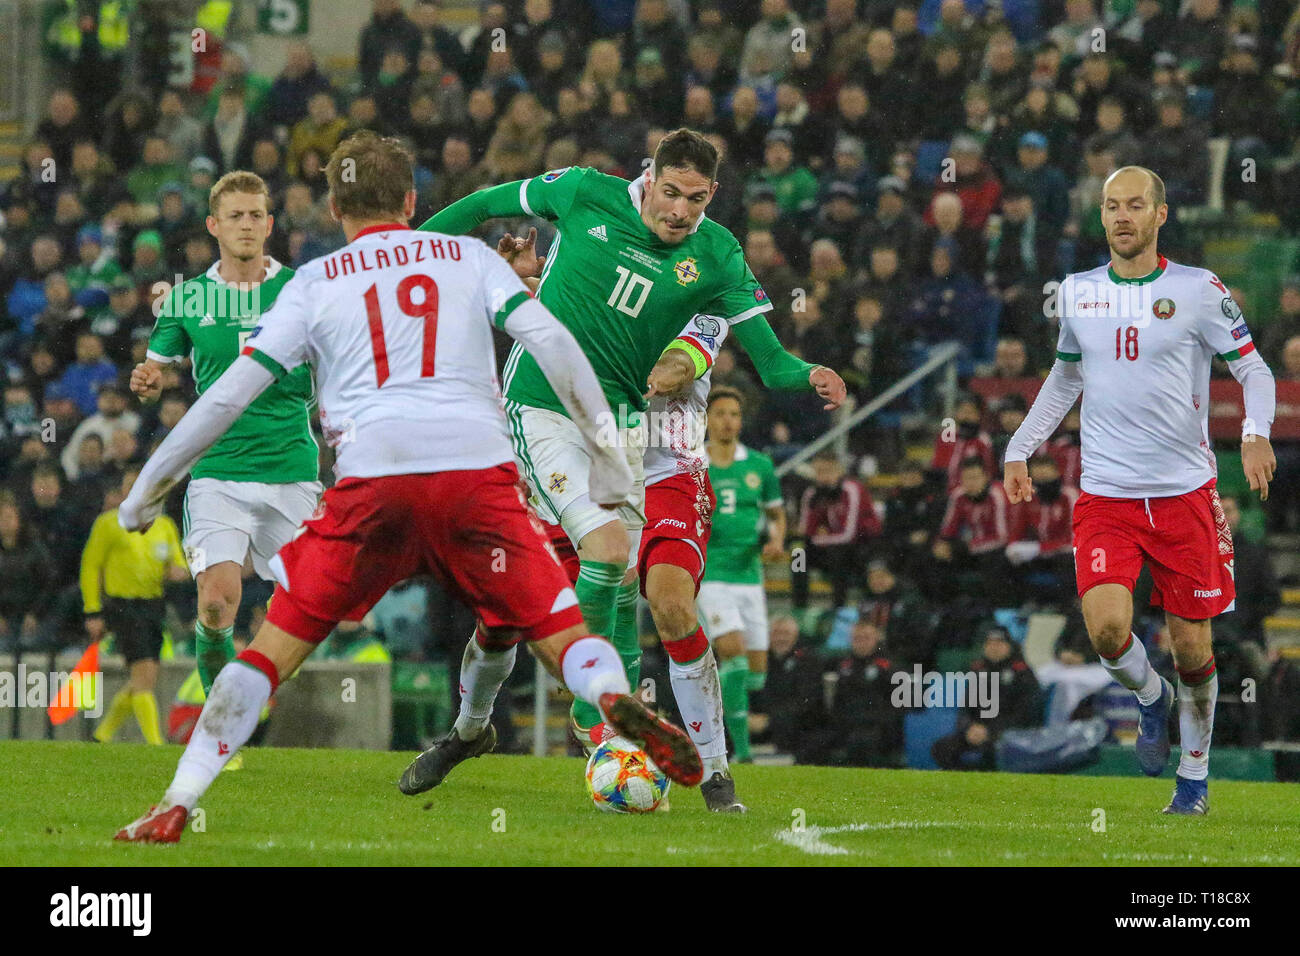 National Football Stadium at Windsor Park, Belfast, Northern Ireland. 24  March 2019. UEFA EURO 2020 Qualifier- Northern Ireland v Belarus. Action from tonight's game. Kyle Lafferty (10) on the attack for Northern Ireland. Credit: David Hunter/Alamy Live News. Stock Photo